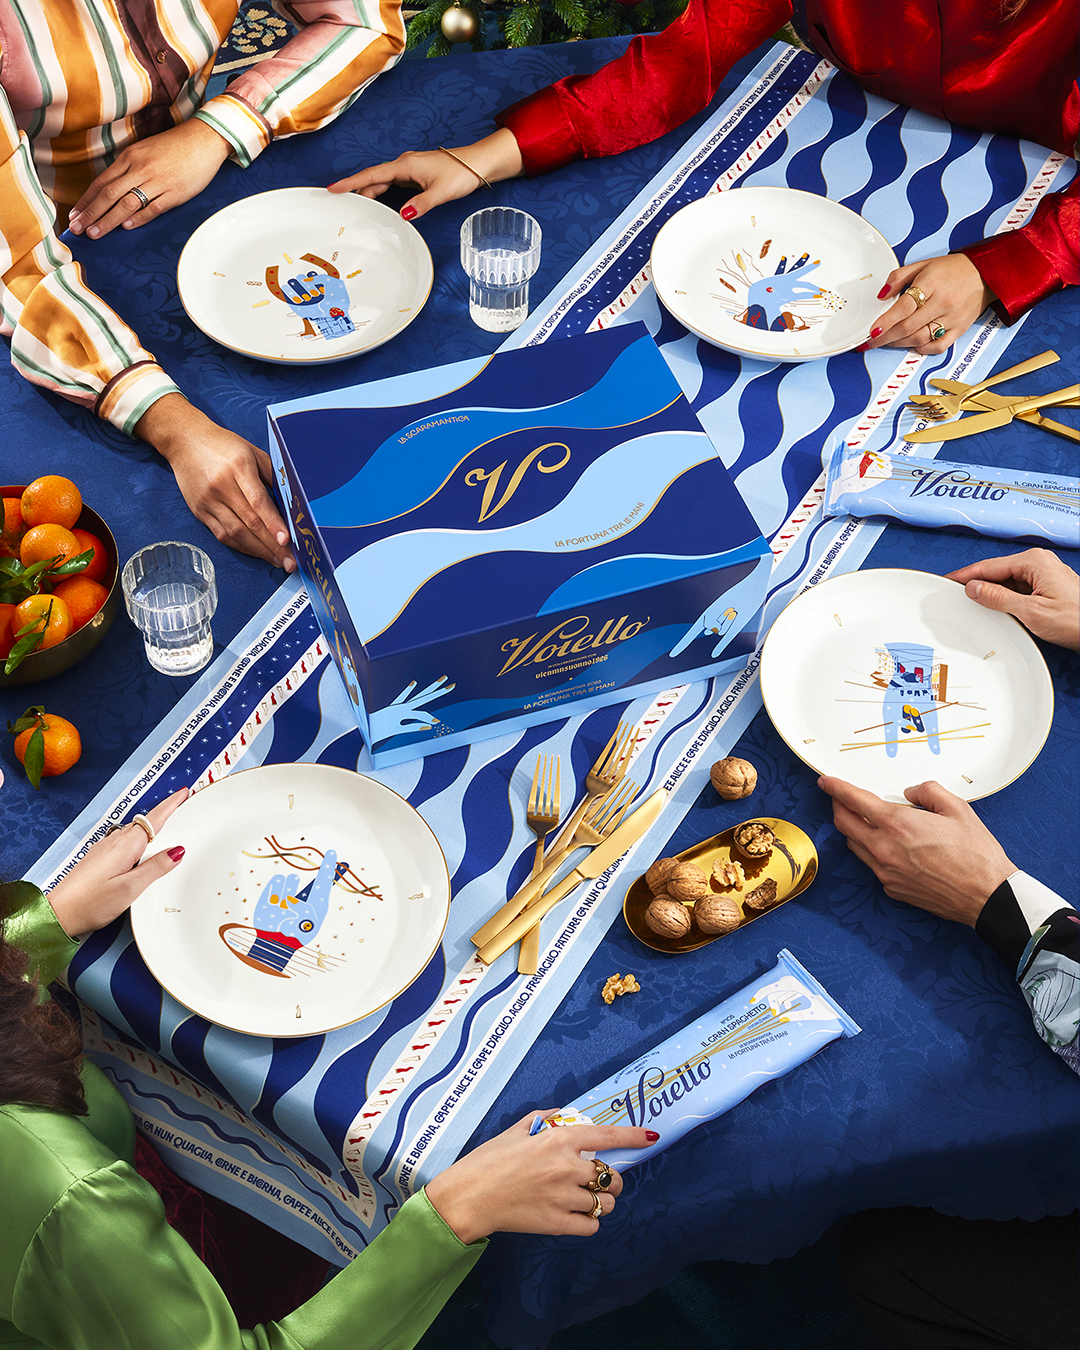 Voiello’s Opulent Promo Packaging Turns an Old Superstition Into a Party